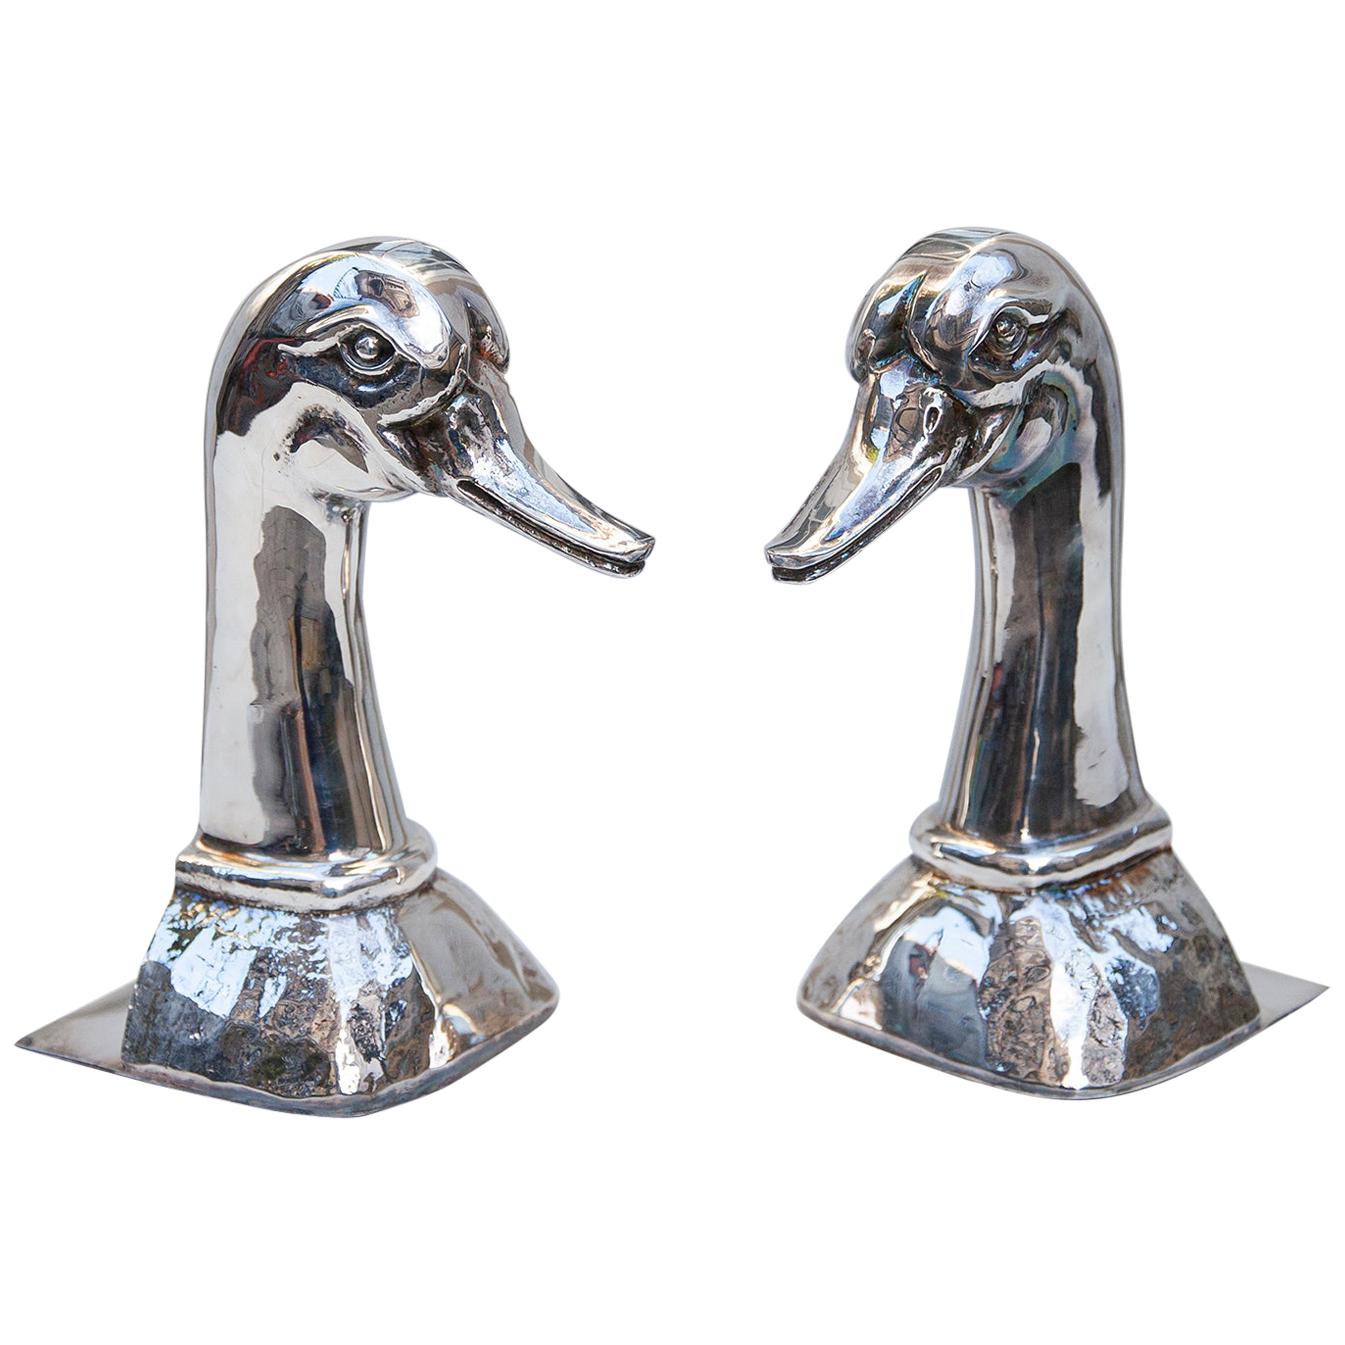 Silver Plated Duck Book Ends by Valenti, Spain, 1970s